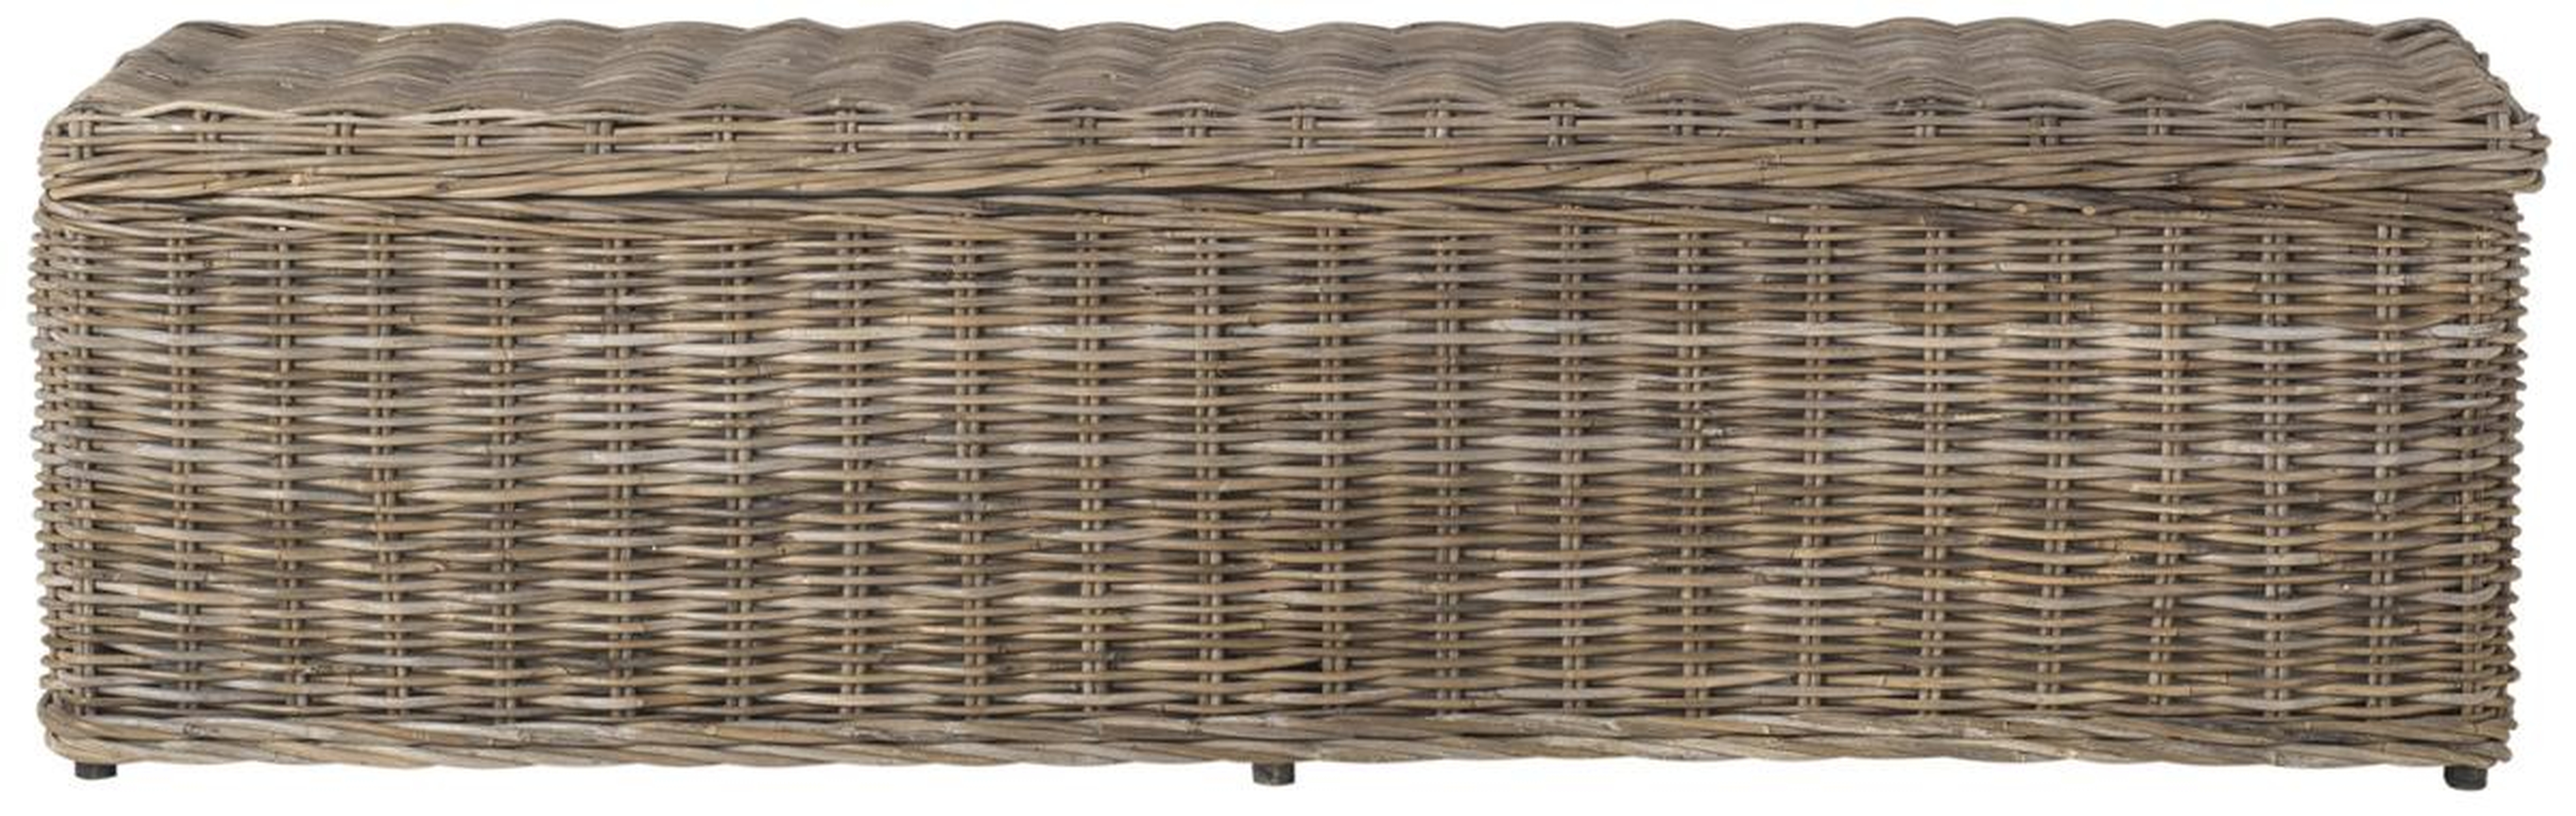 Caius Wicker Bench With Storage - Natural - Arlo Home - Arlo Home